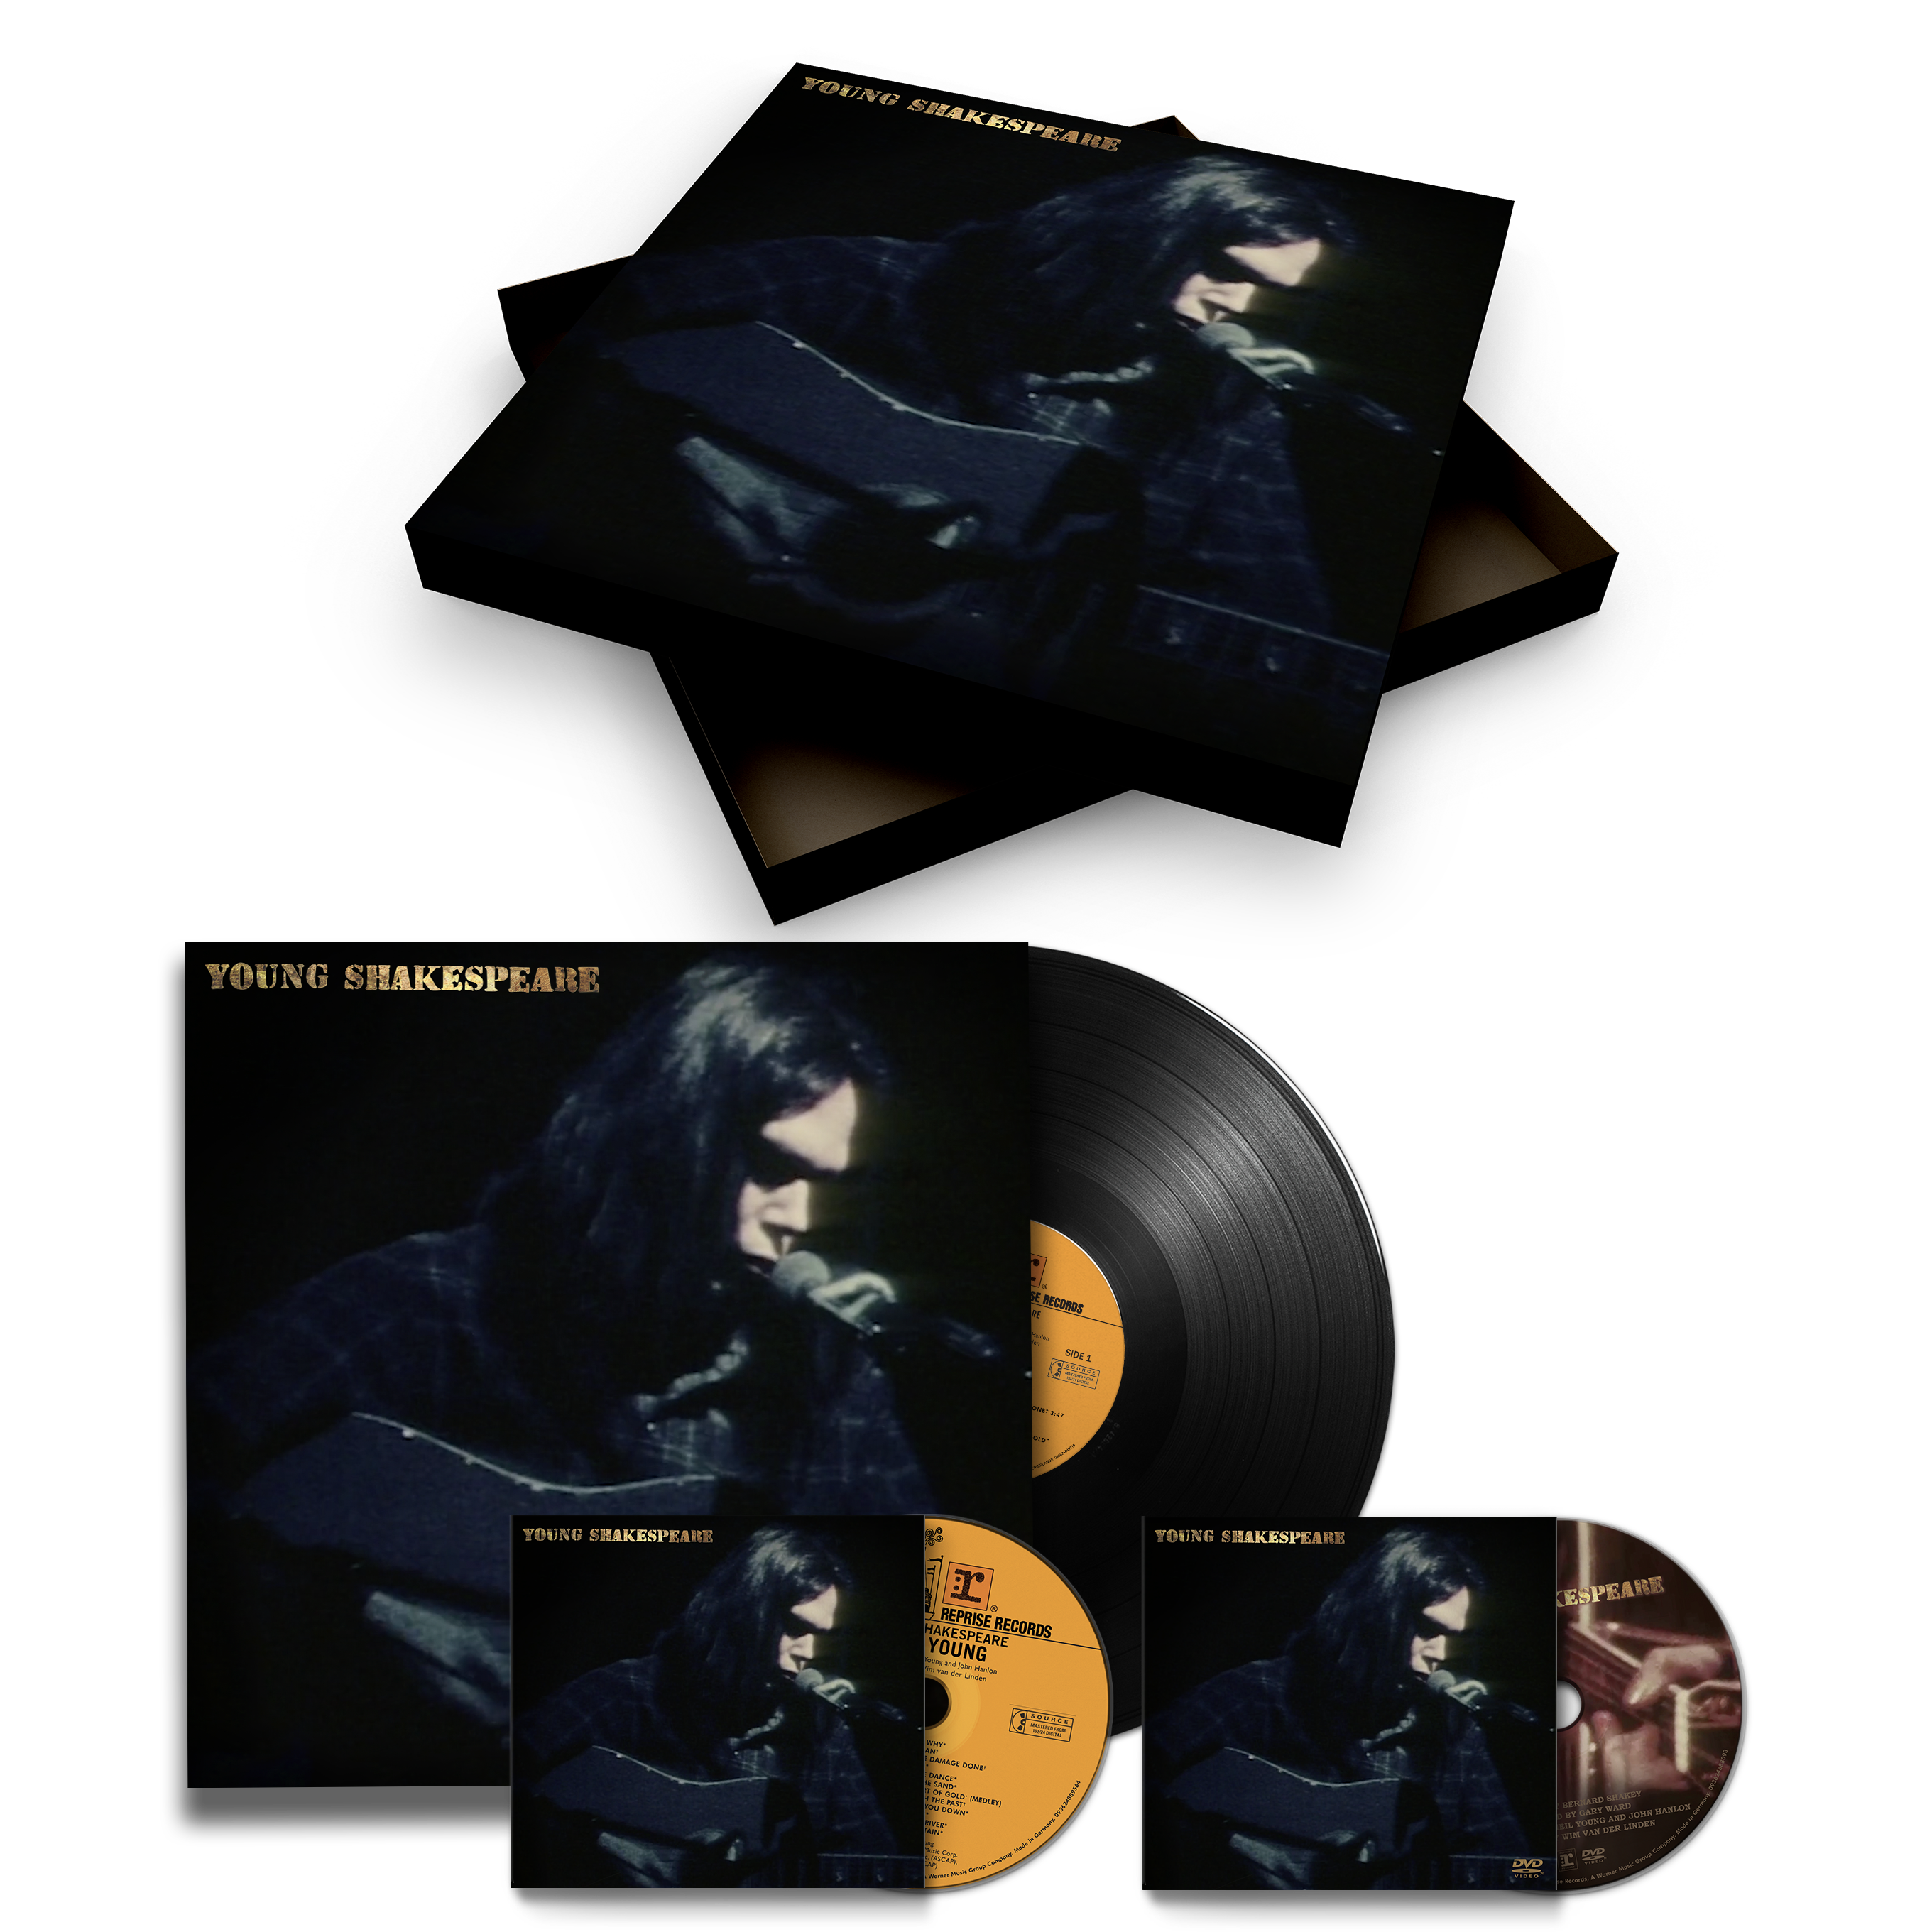 Neil Young - Young Shakespeare: Deluxe Vinyl Box Set